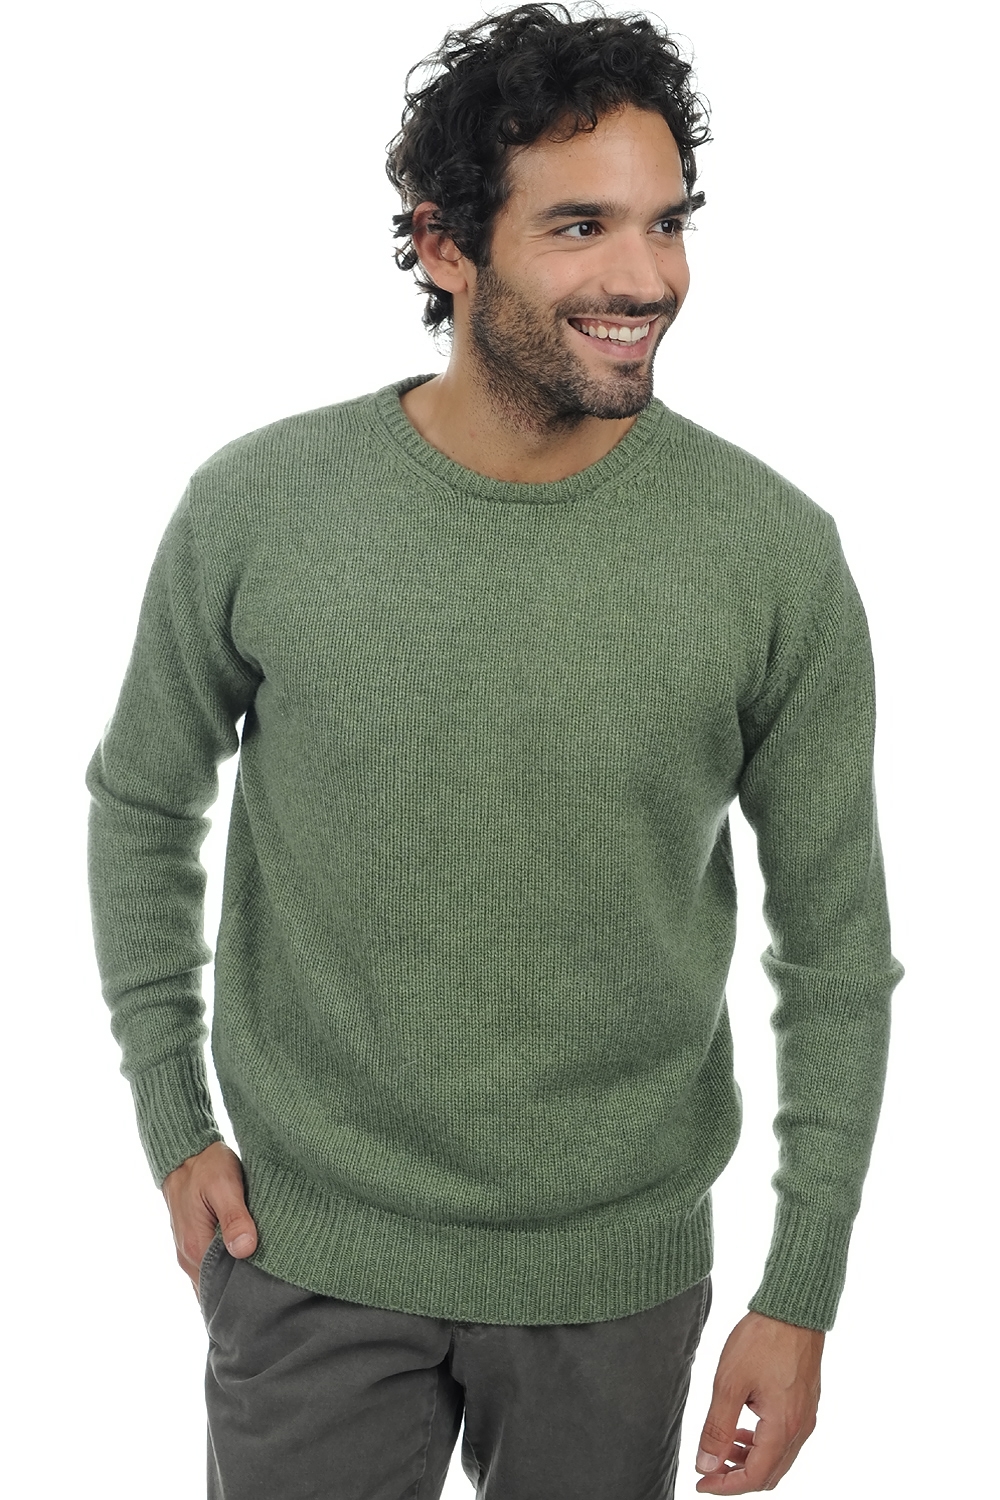 Cashmere men chunky sweater bilal olive chine 2xl